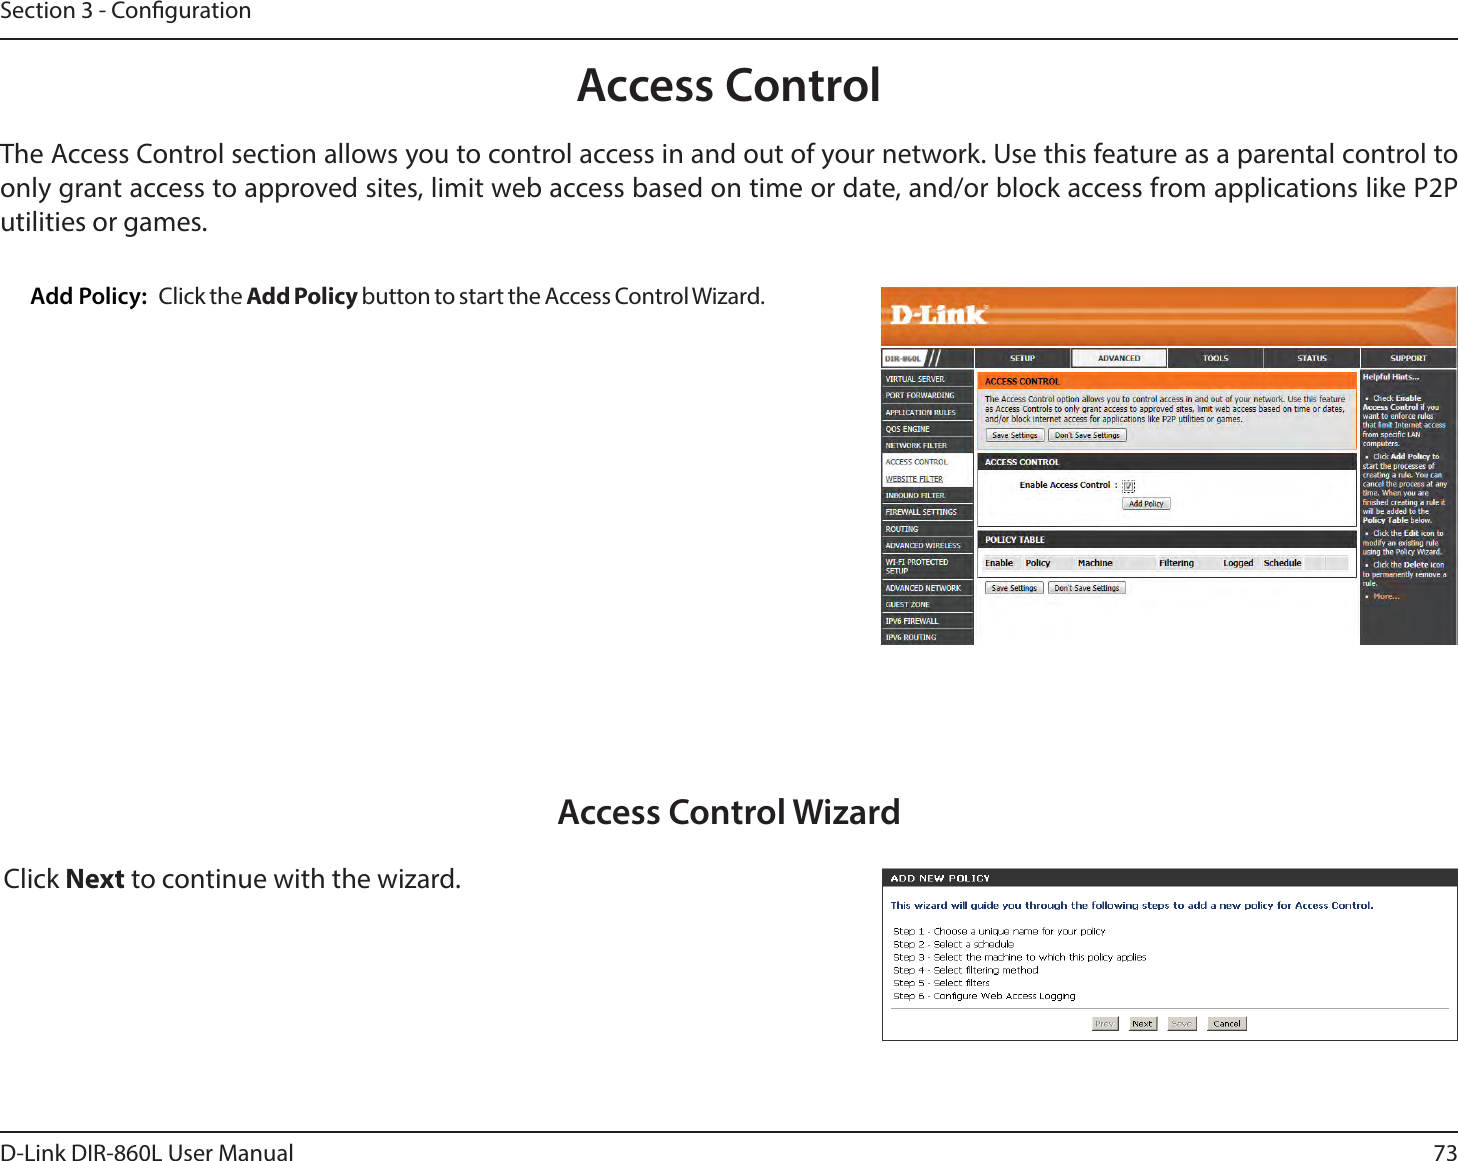 73D-Link DIR-860L User ManualSection 3 - CongurationAccess ControlClick the &quot;EE1PMJDZ button to start the Access Control Wizard. Add Policy:The Access Control section allows you to control access in and out of your network. Use this feature as a parental control to only grant access to approved sites, limit web access based on time or date, and/or block access from applications like P2P utilities or games.Click Next to continue with the wizard.Access Control Wizard